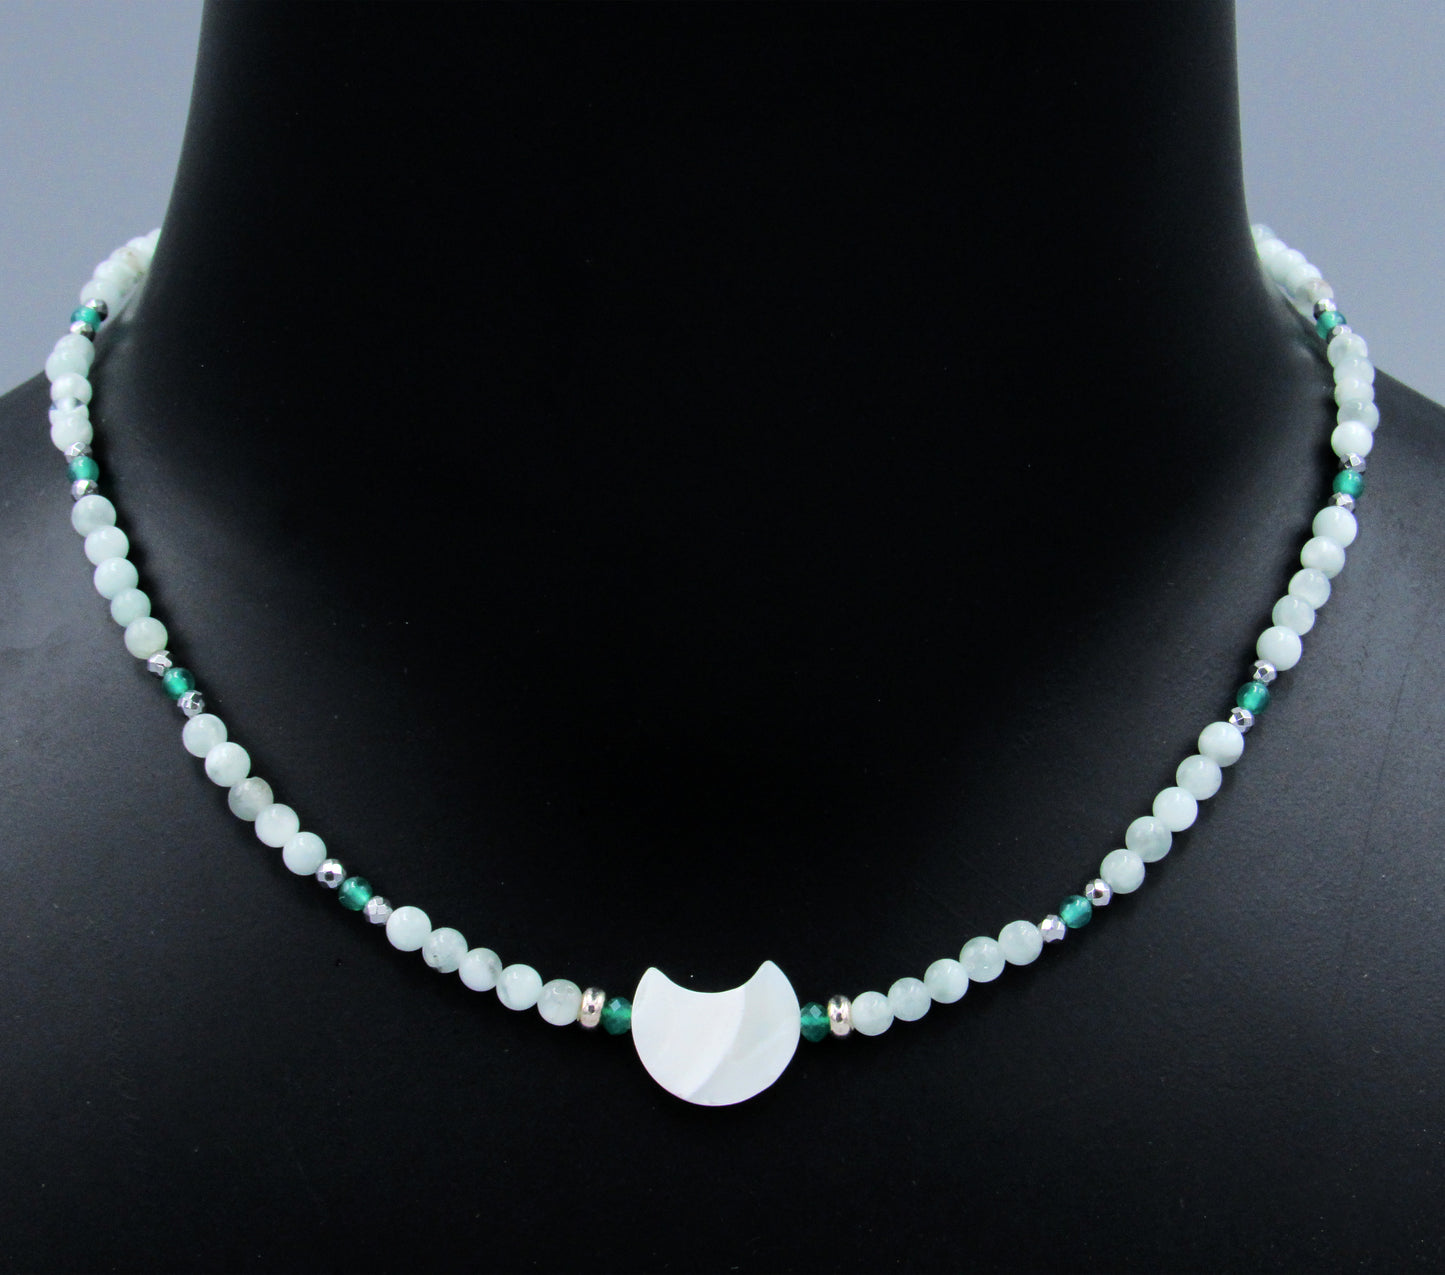 Mother of Pearl Moon Necklace w/ Green Moonstones, Green Onyx, Hematite, and Sterling Silver